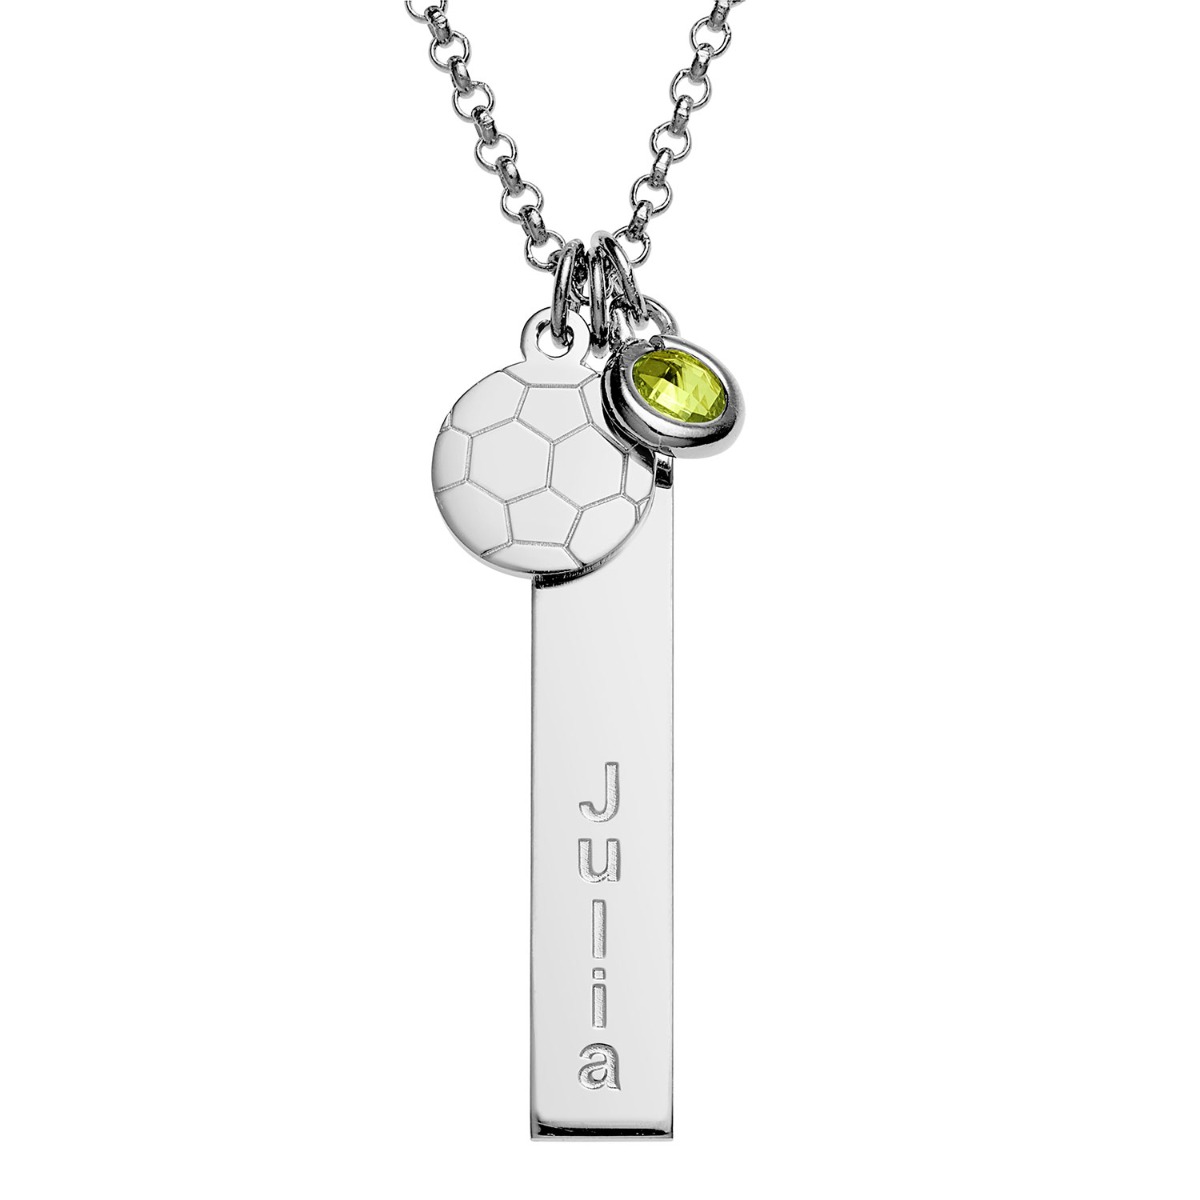 Silvertone Name Necklace with Soccer Ball Charm and Birthstone Dangle